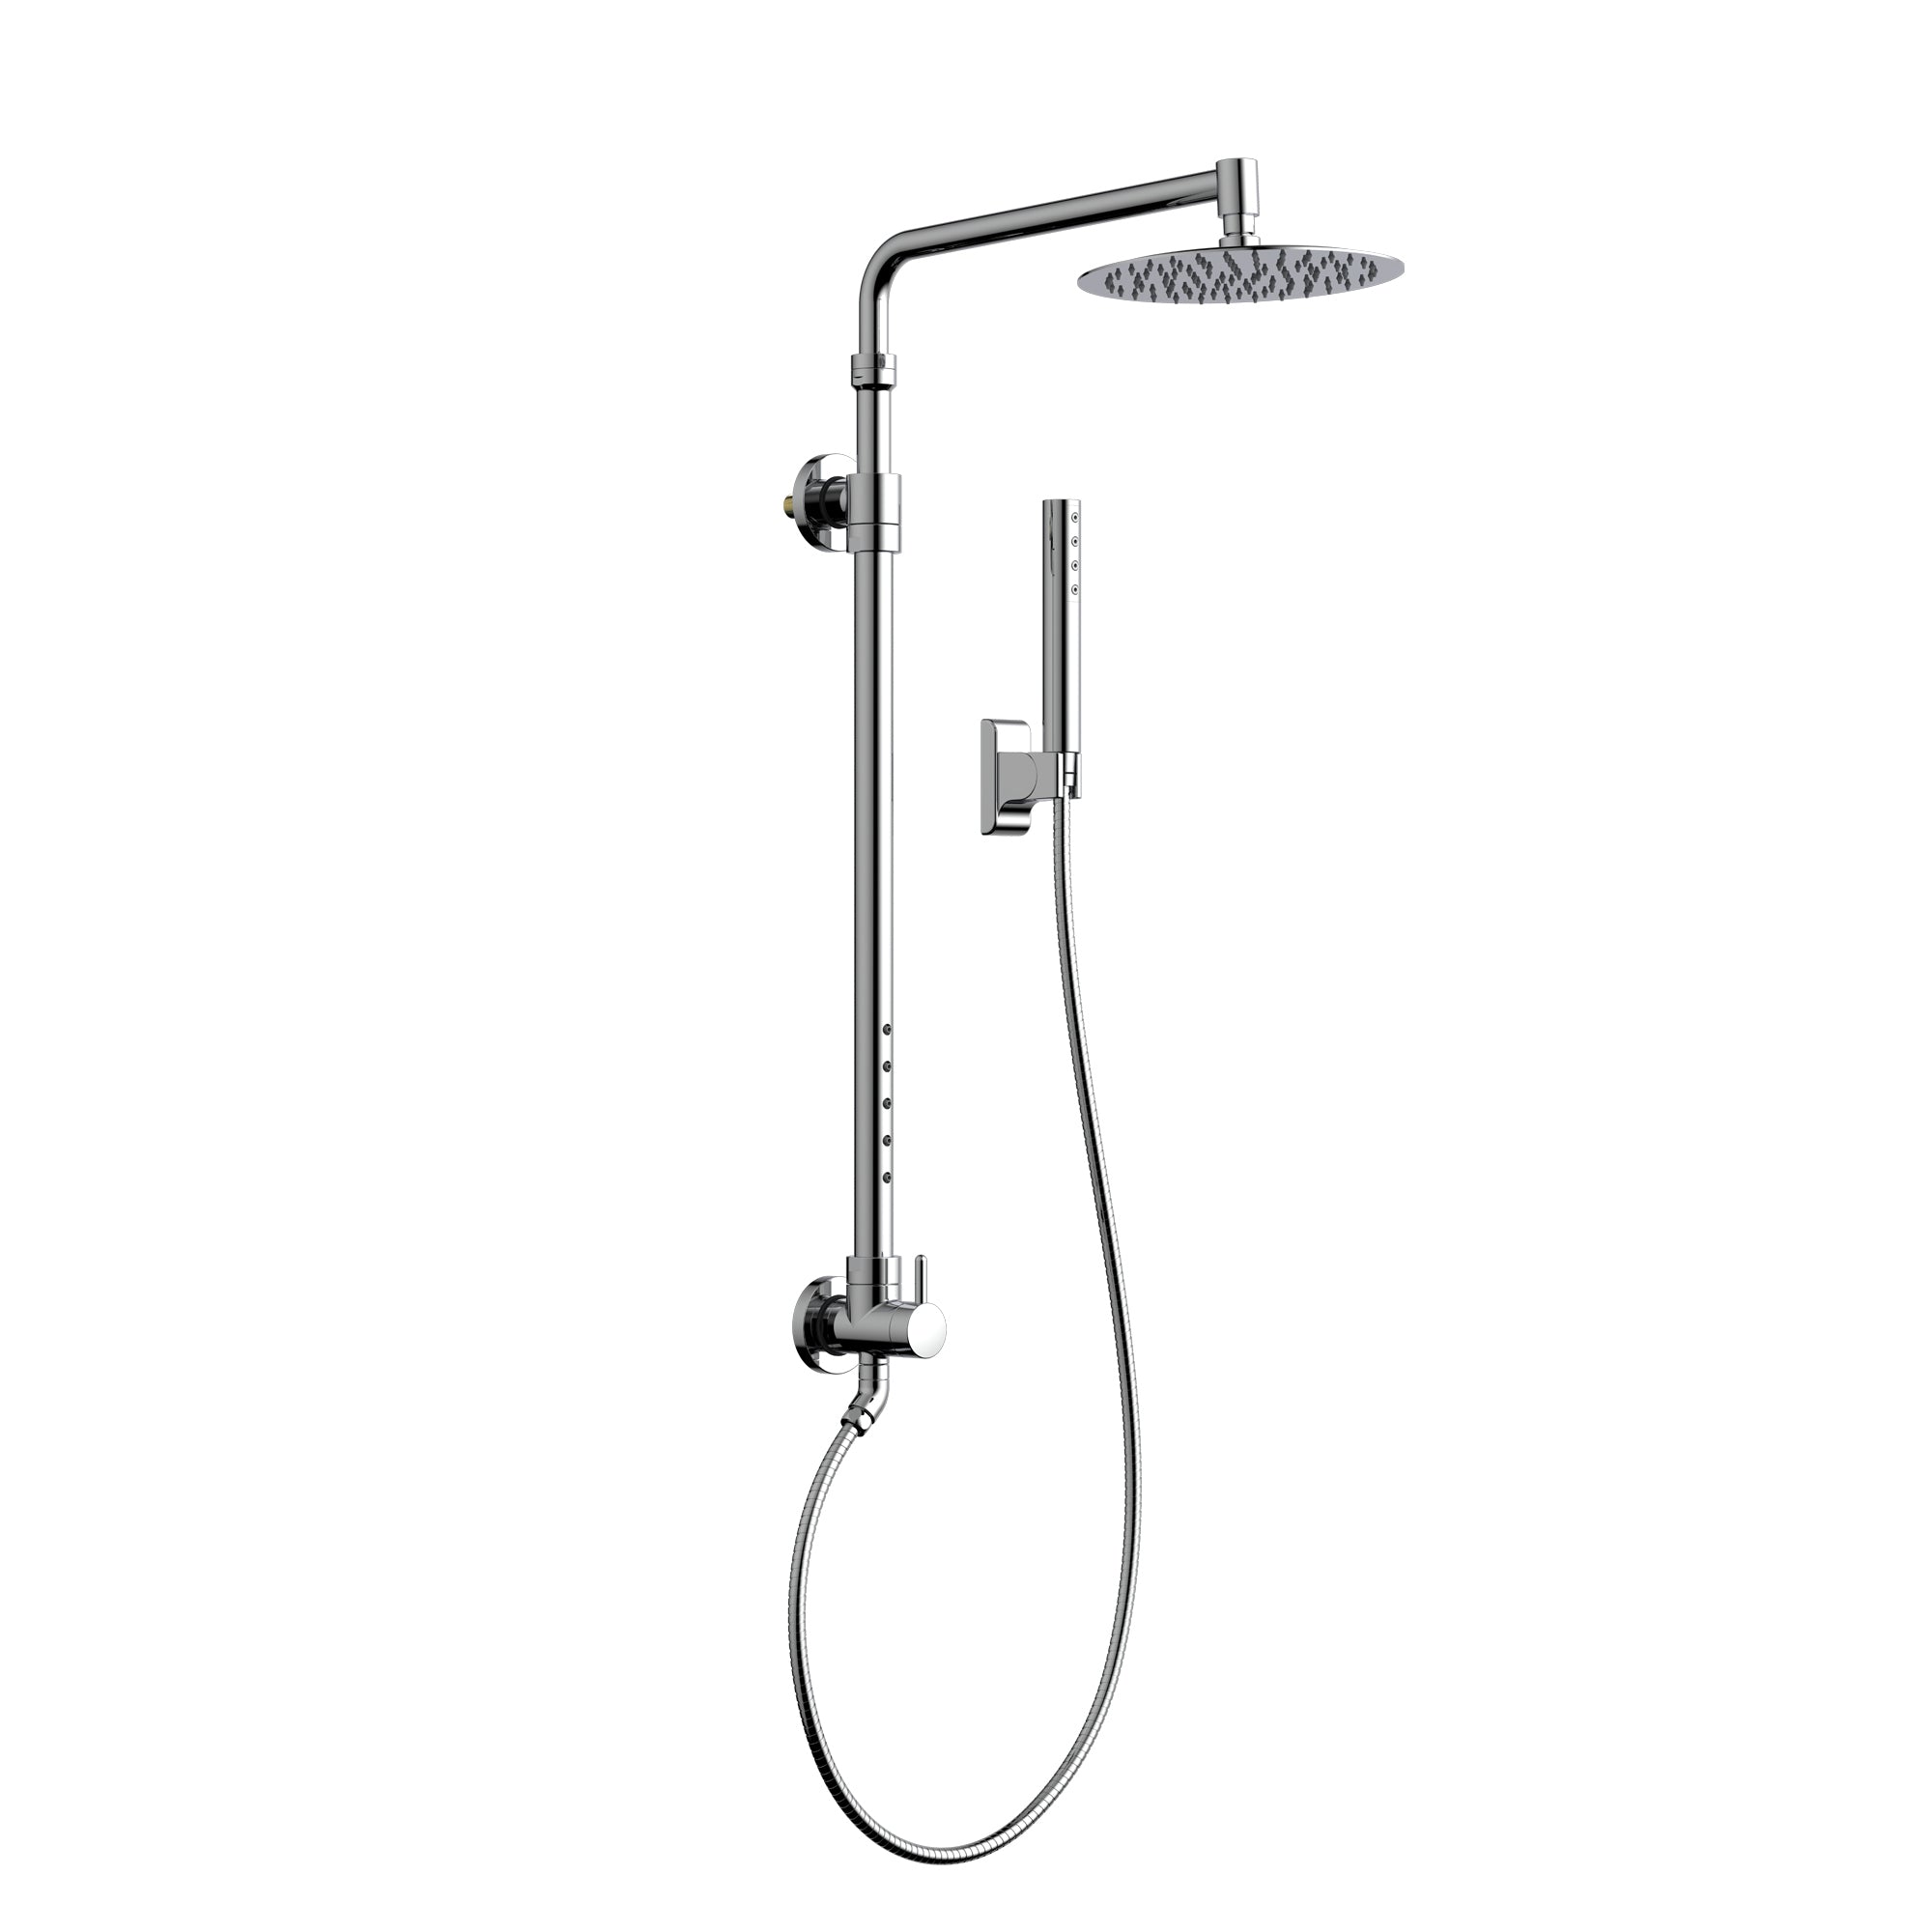 PULSE ShowerSpas Shower System - Atlantis Shower System - All brass body and fixtures - 10-inch rain showerhead along with the 5 PULSE Power Nozzles, hand shower holds by the hand shower holder and Brass diverter - Polished Chrome - 1059 - Vital Hydrotherapy